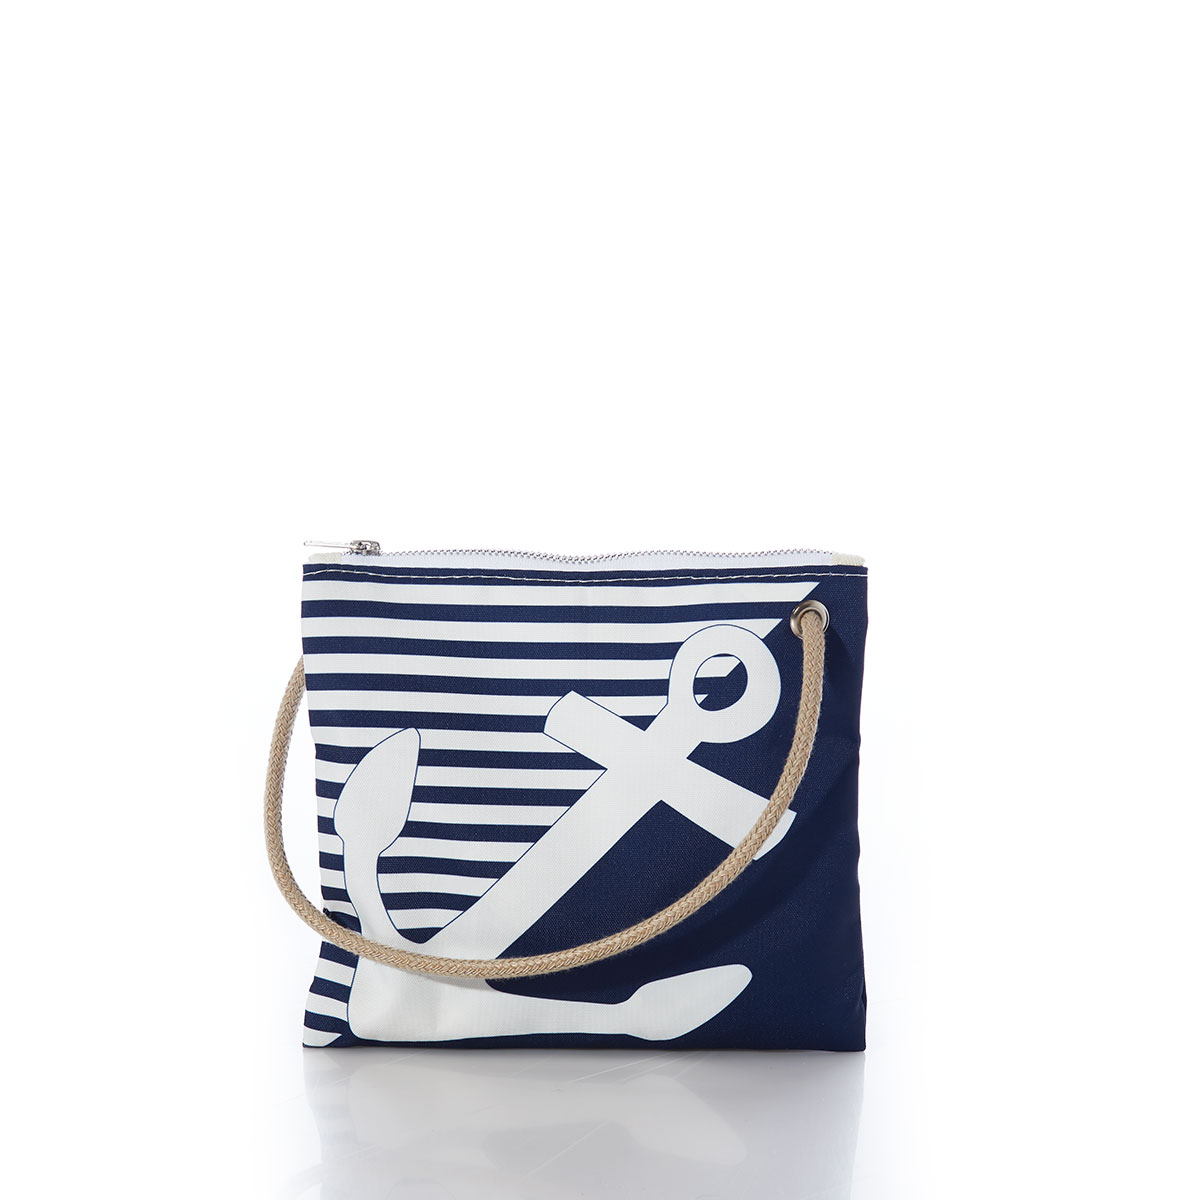 a white anchor divides a solid navy blue bottom right triangle and a navy and white striped top left triangle, printed on a recycled sail cloth crossbody bag with tan rope handle